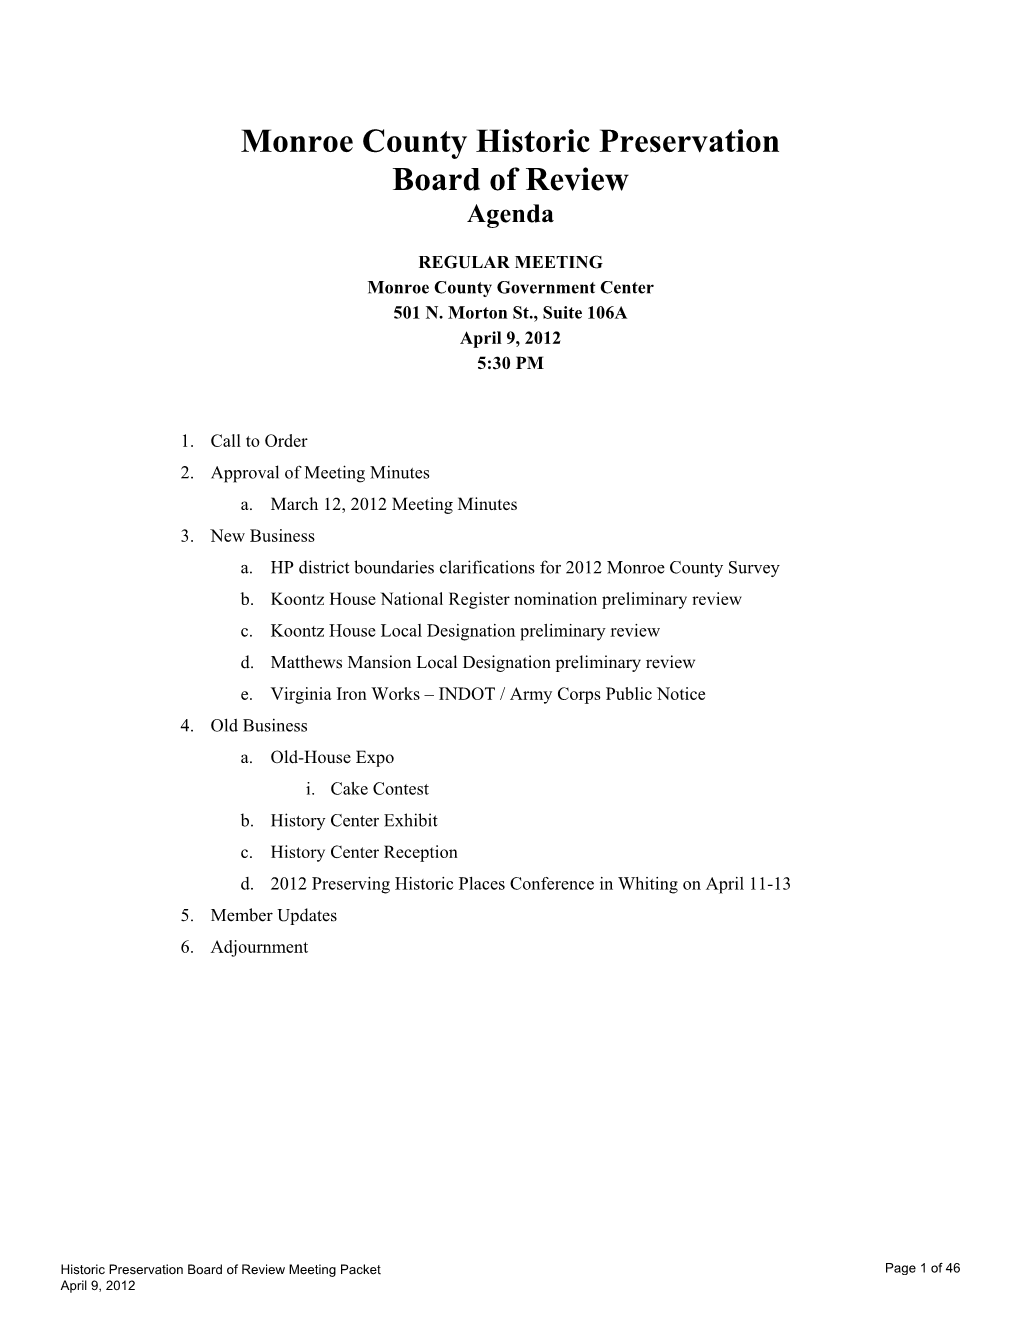 Monroe County Historic Preservation Board of Review Agenda